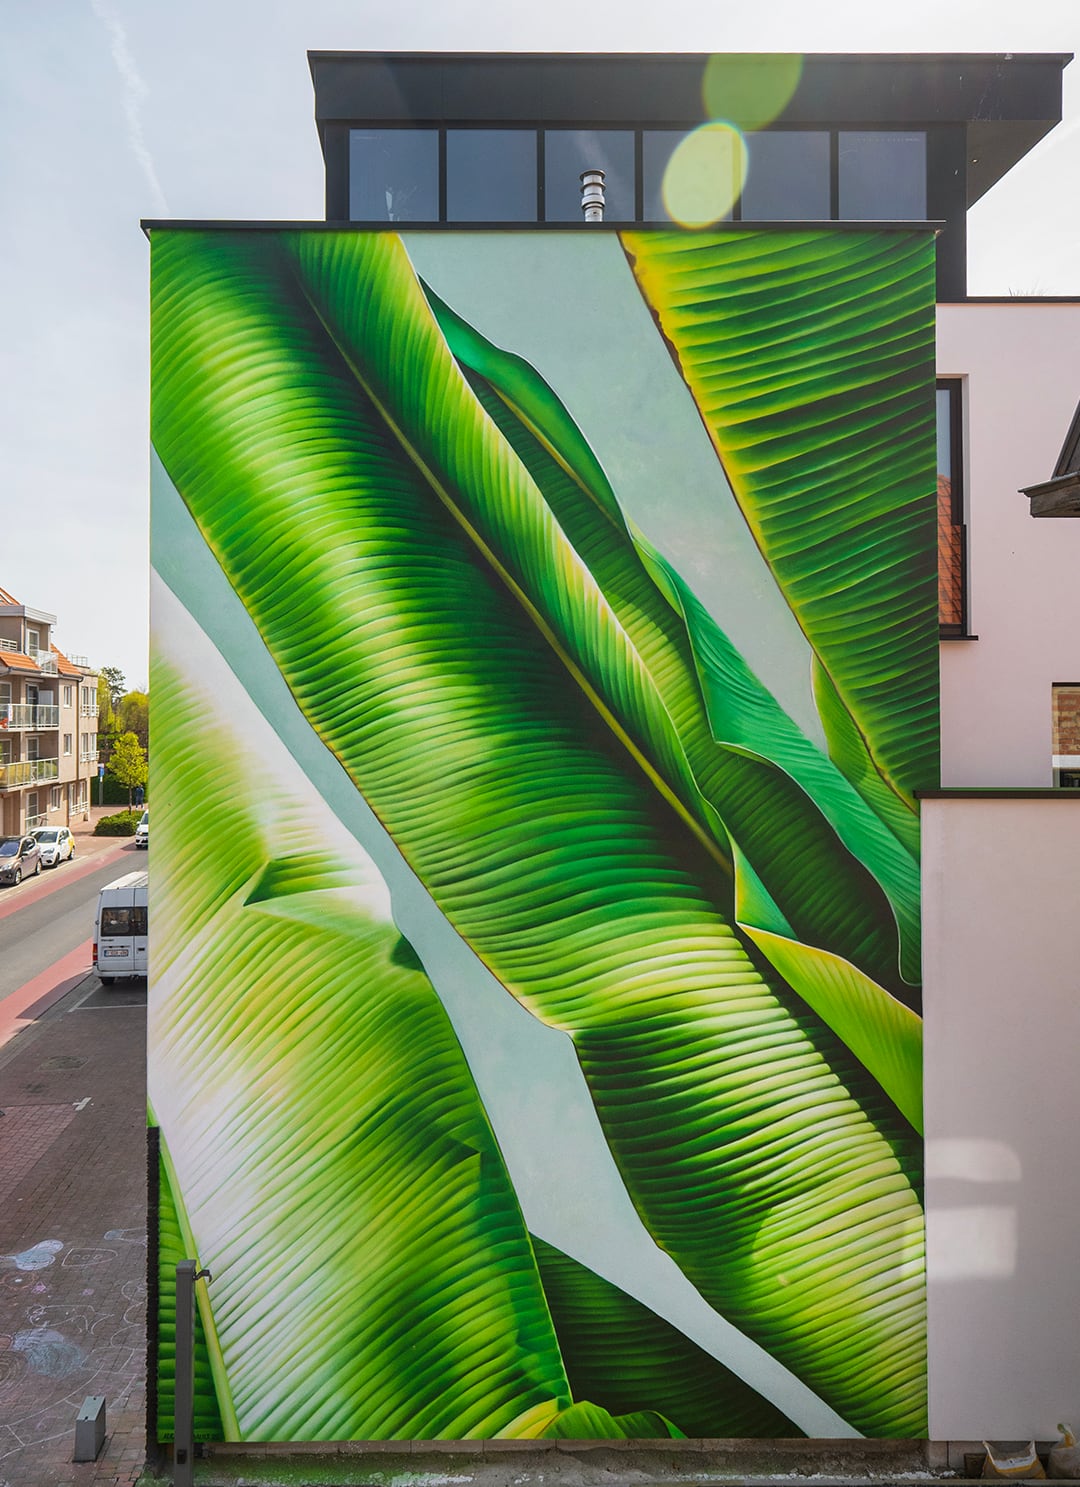 Giant Leafy Murals By Adele Renault (9)